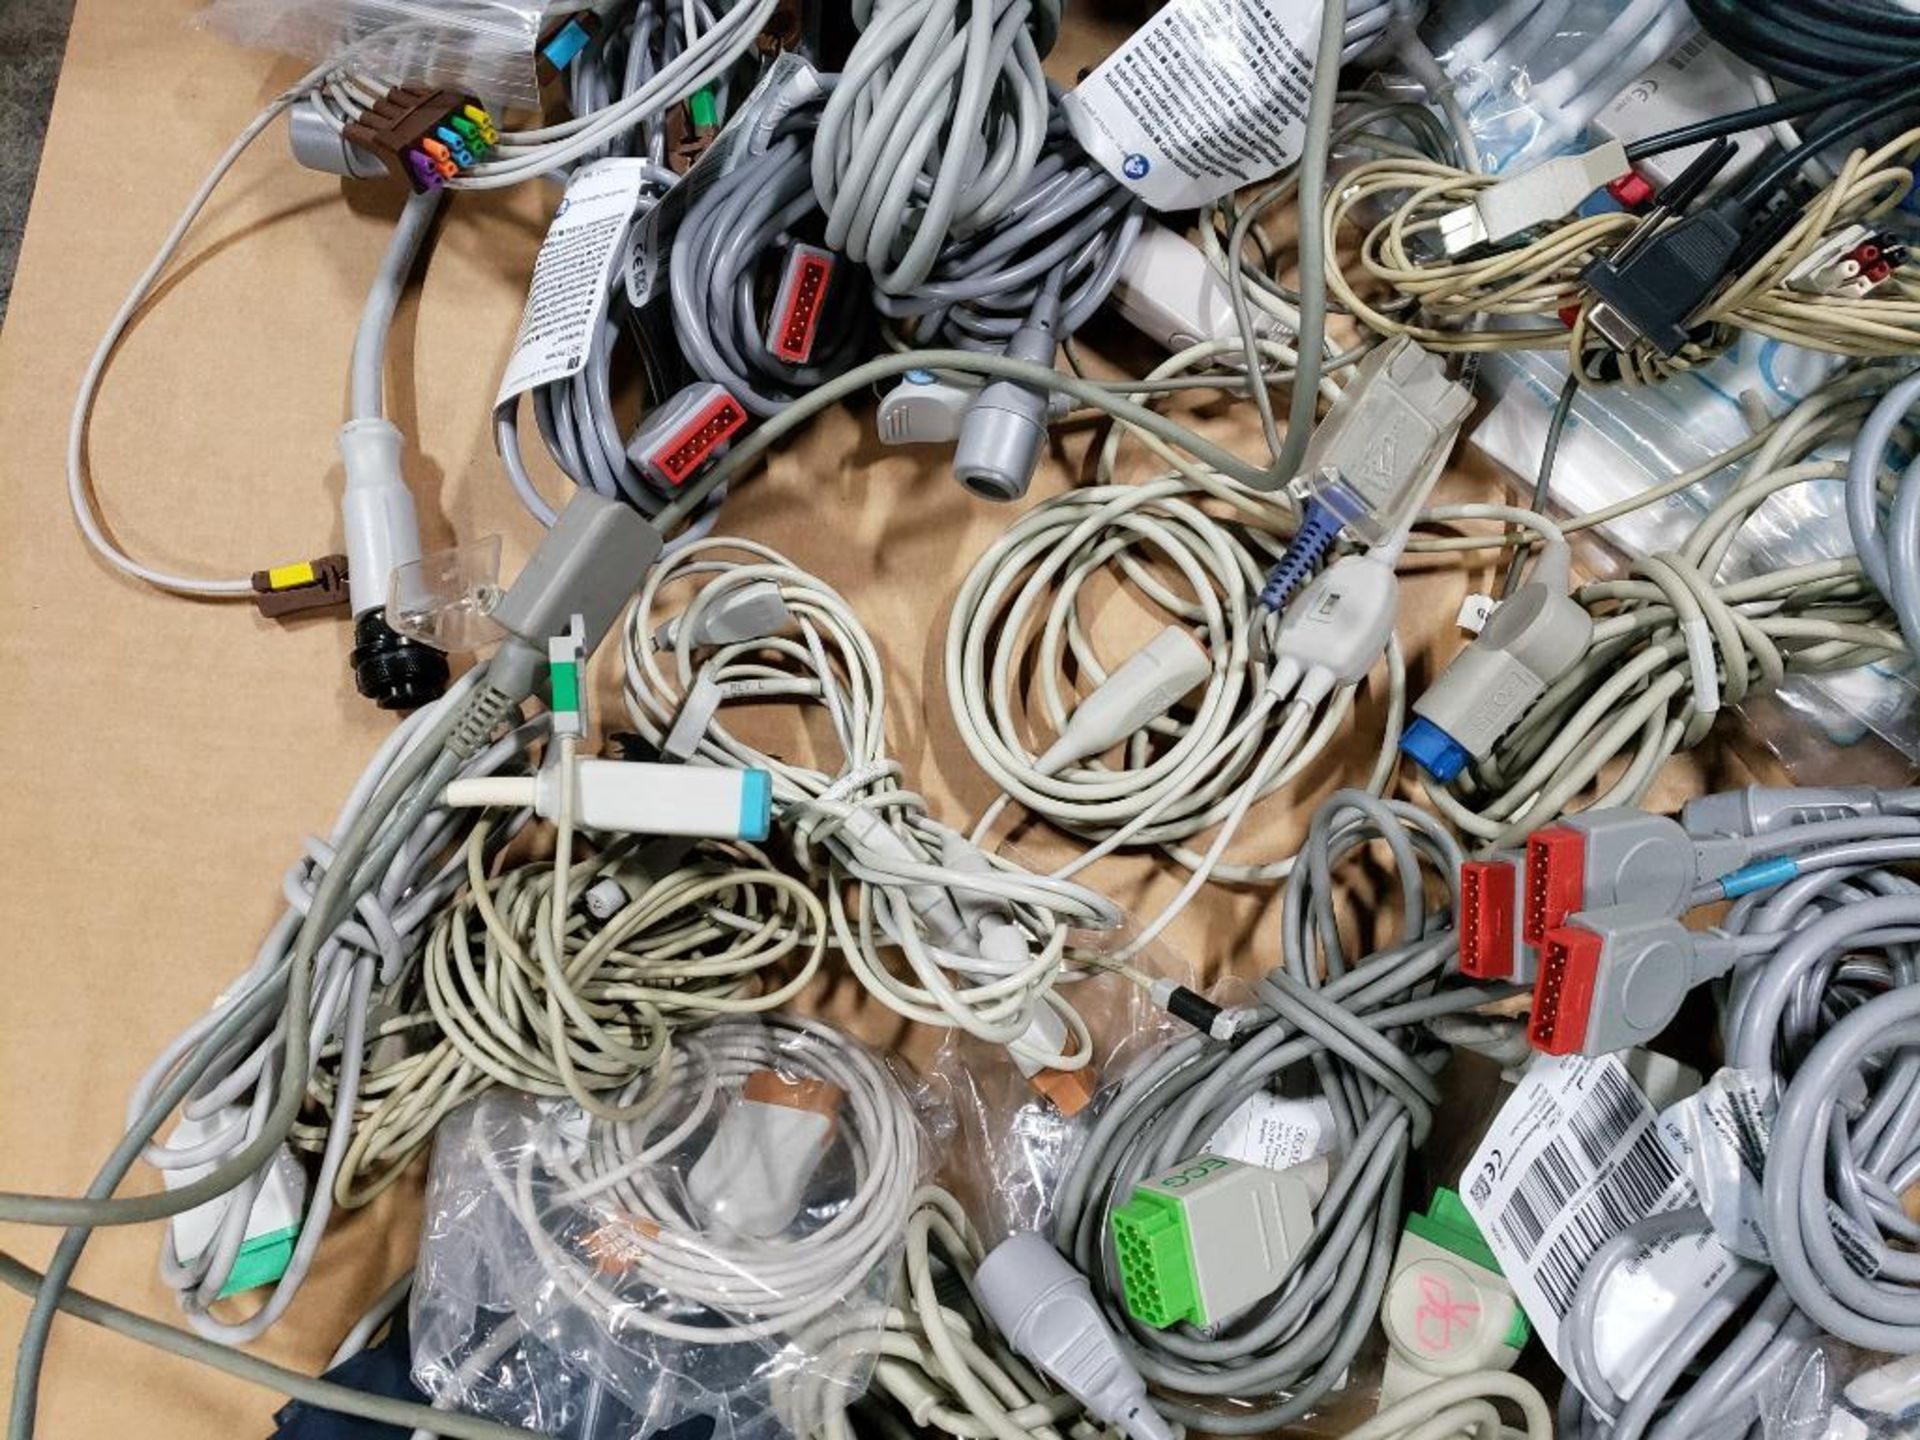 Large assortment of cords and cables. - Image 8 of 11